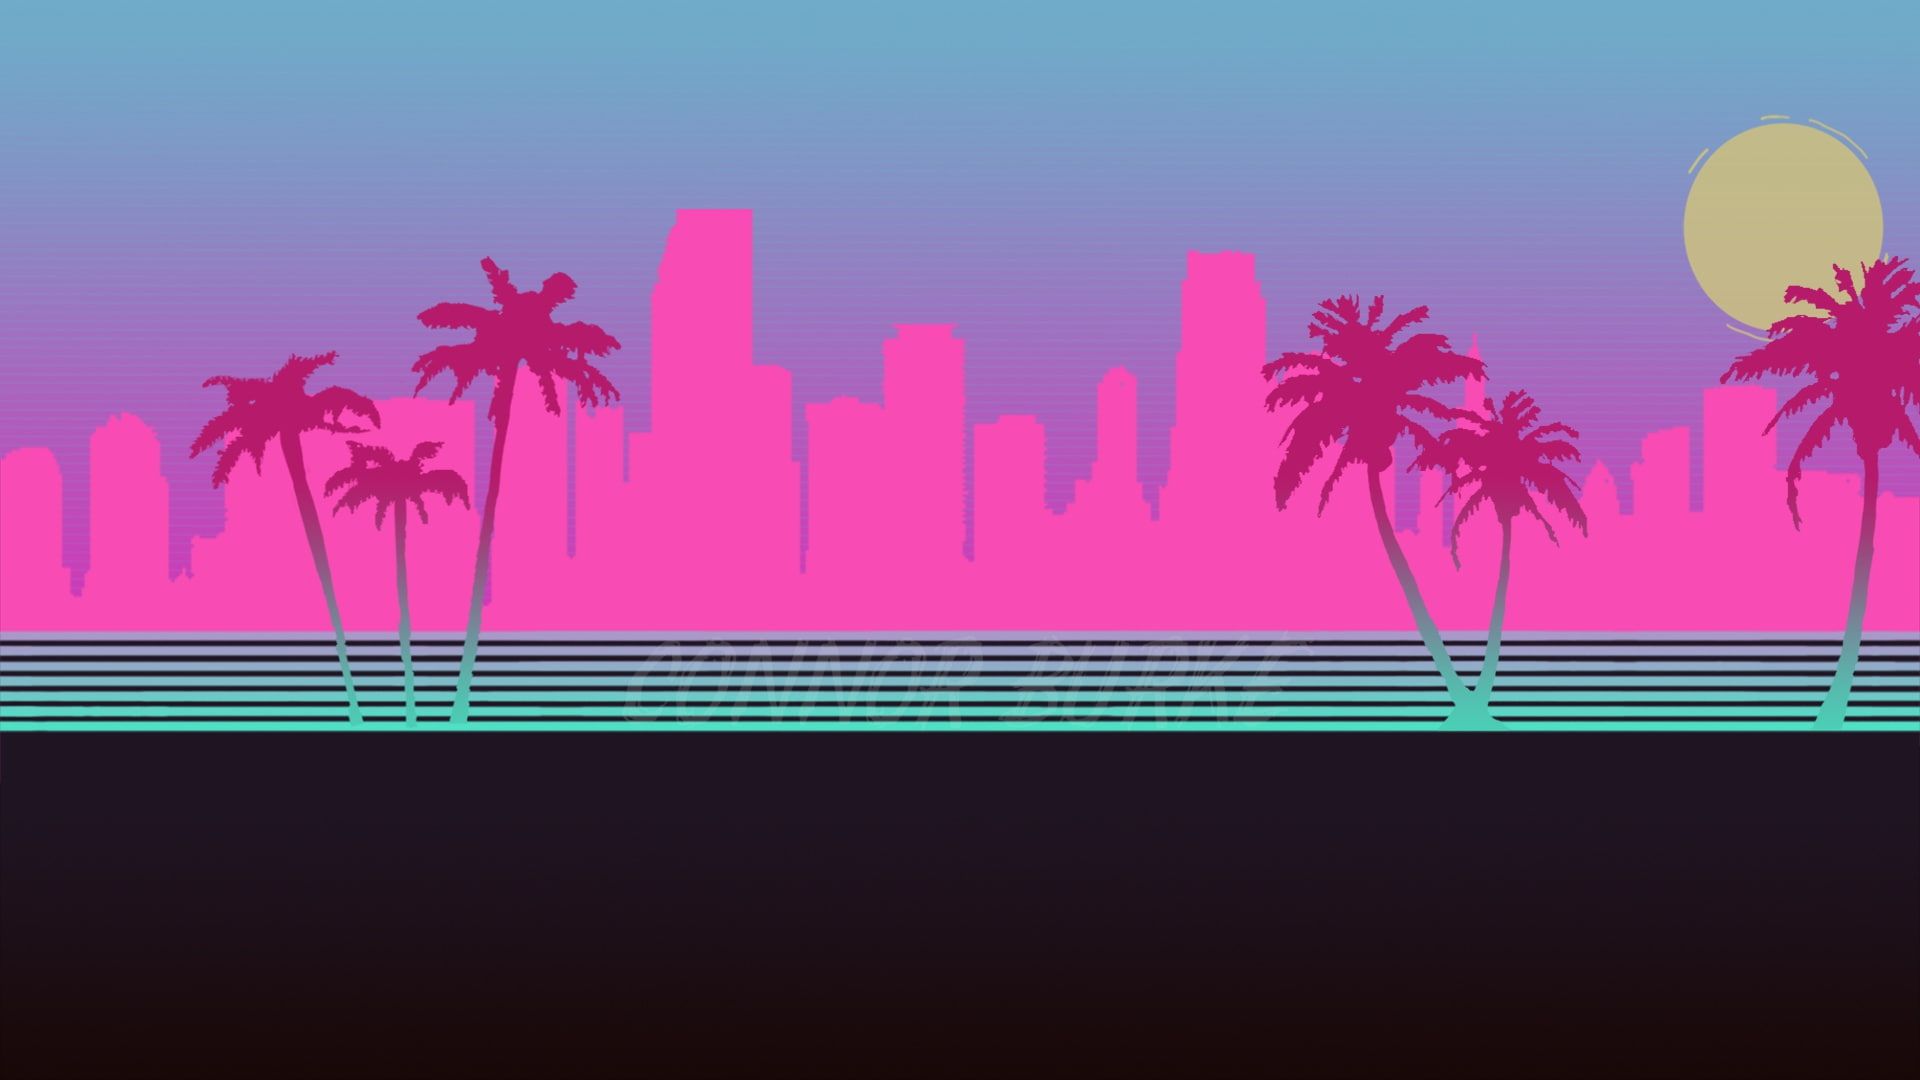 The city #Neon Palm trees #Silhouette #Background Hotline Miami #Synthpop #Darkwave #Synth #Retrowave #Synthw. Vaporwave wallpaper, Miami wallpaper, Hotline miami